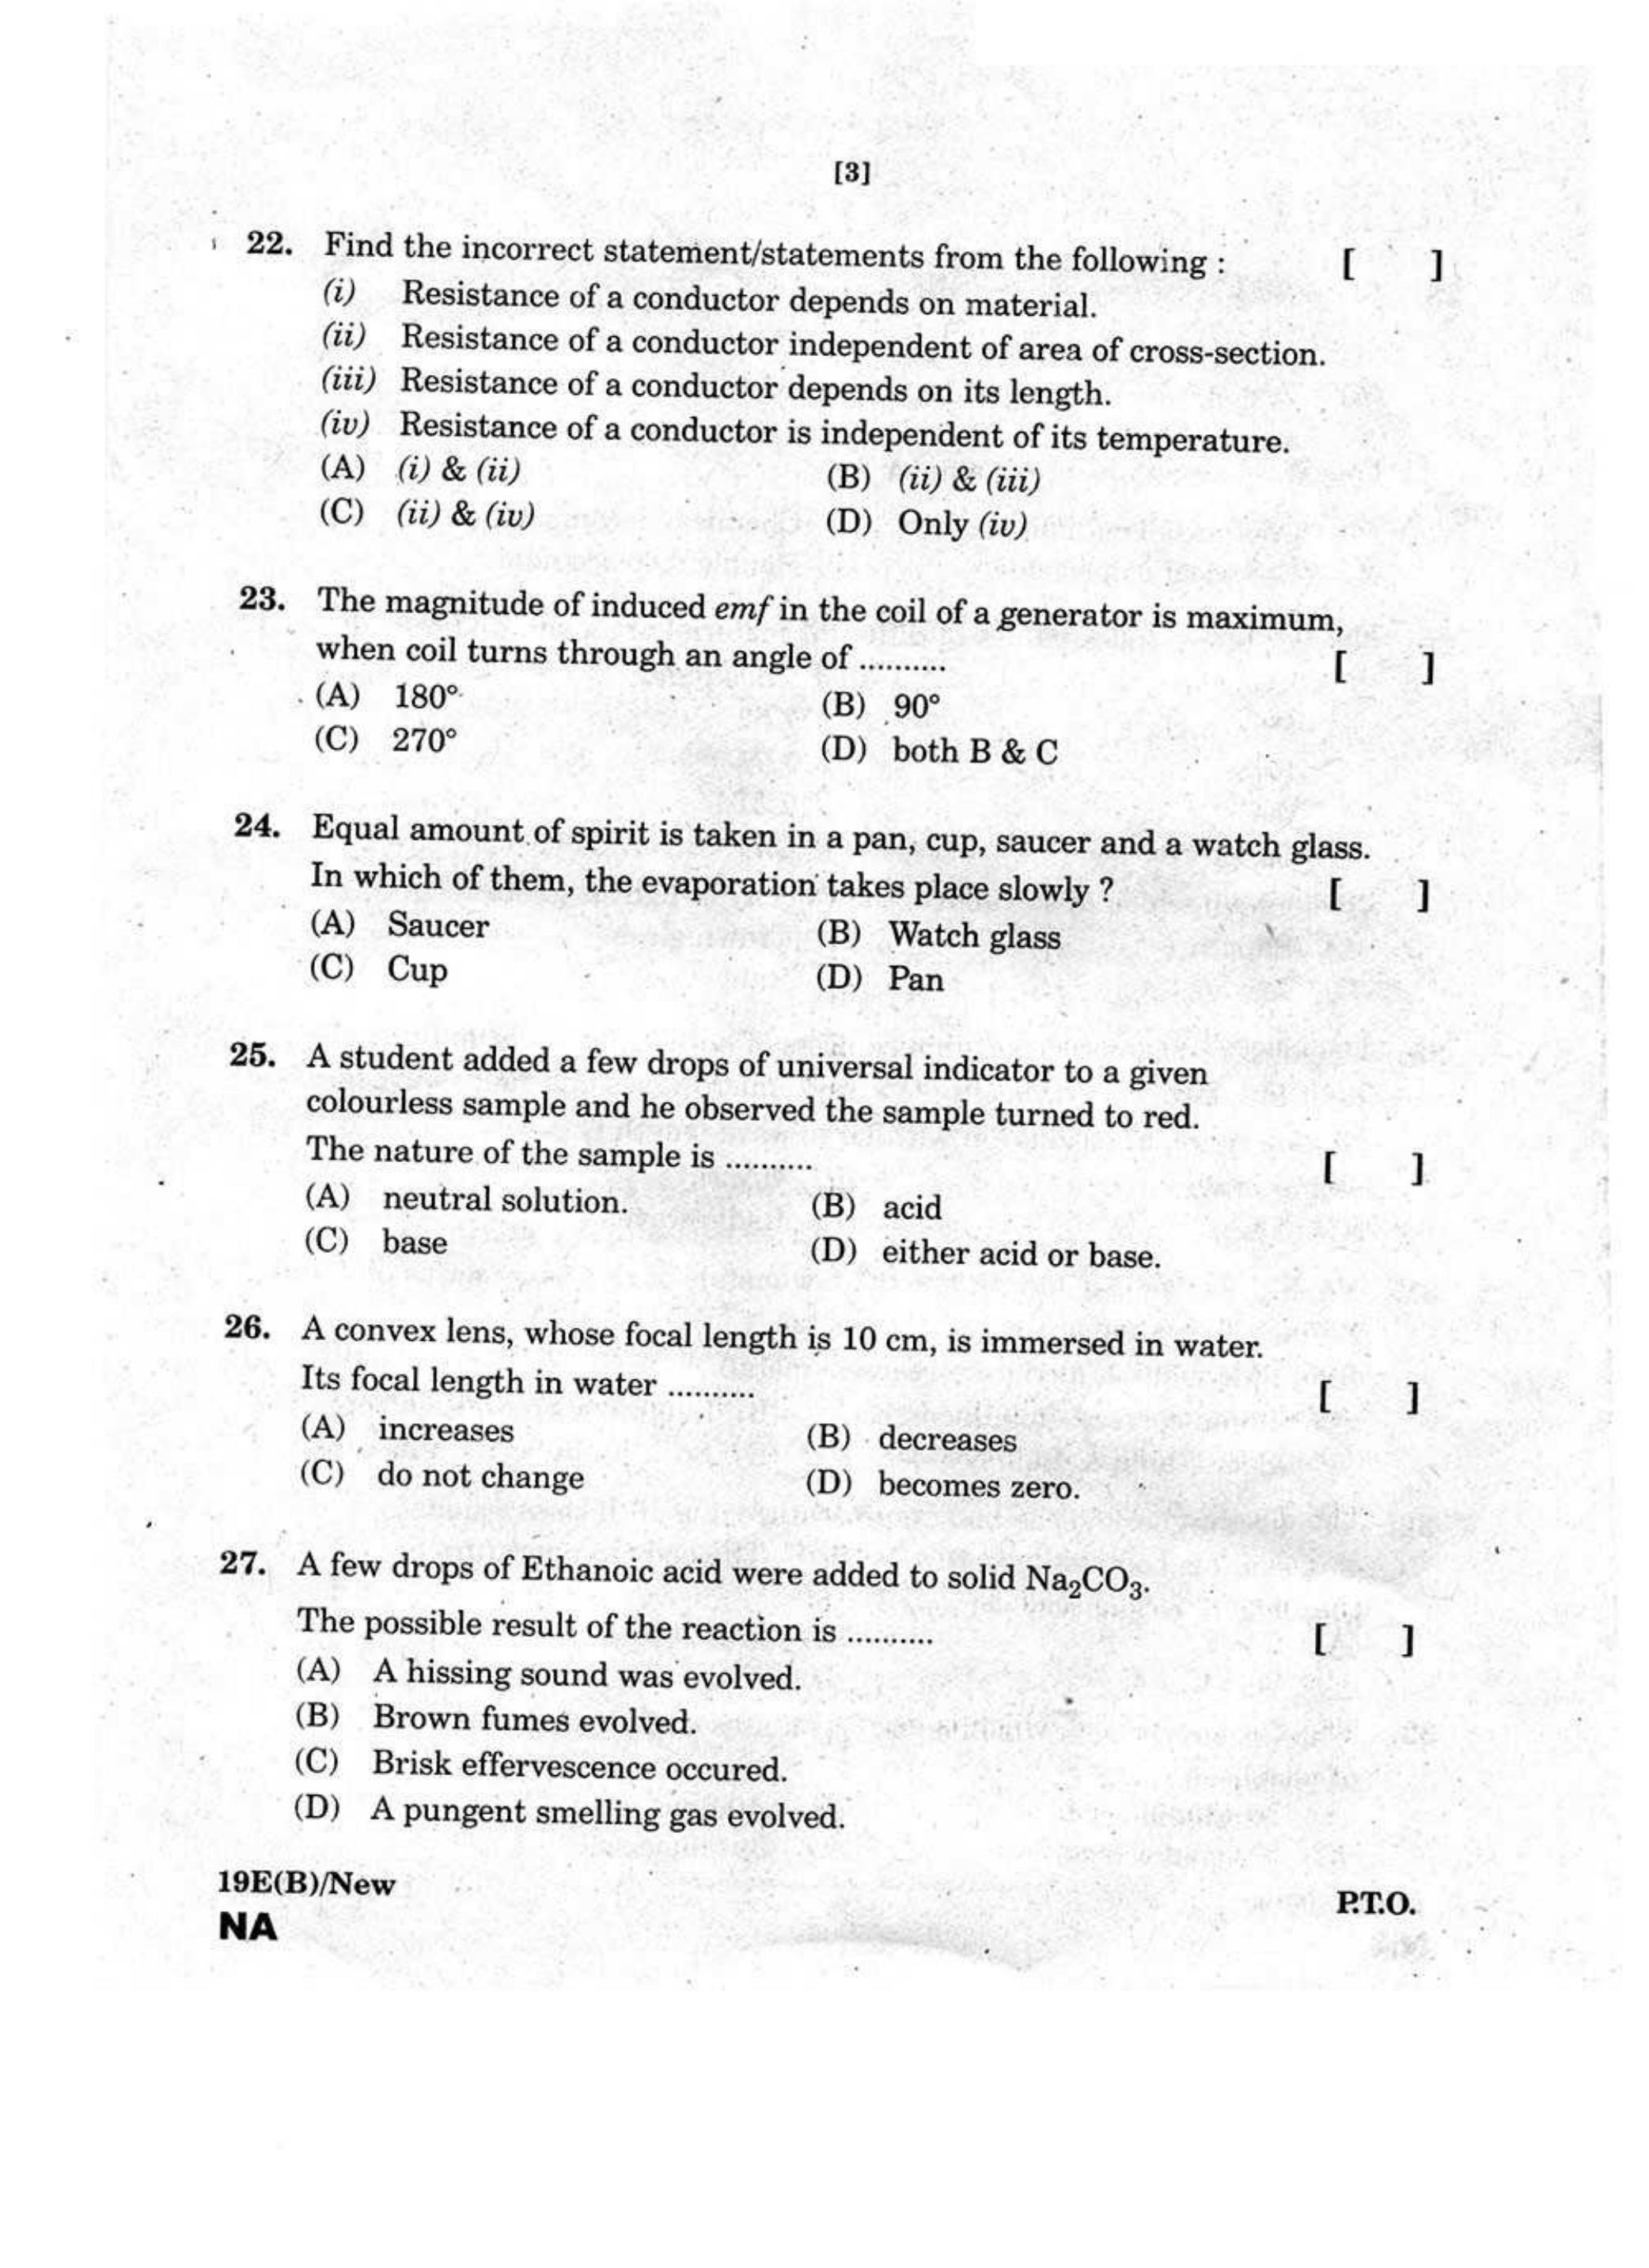 AP Class 10 Science (Paper I) 2017 Question Paper - Page 7